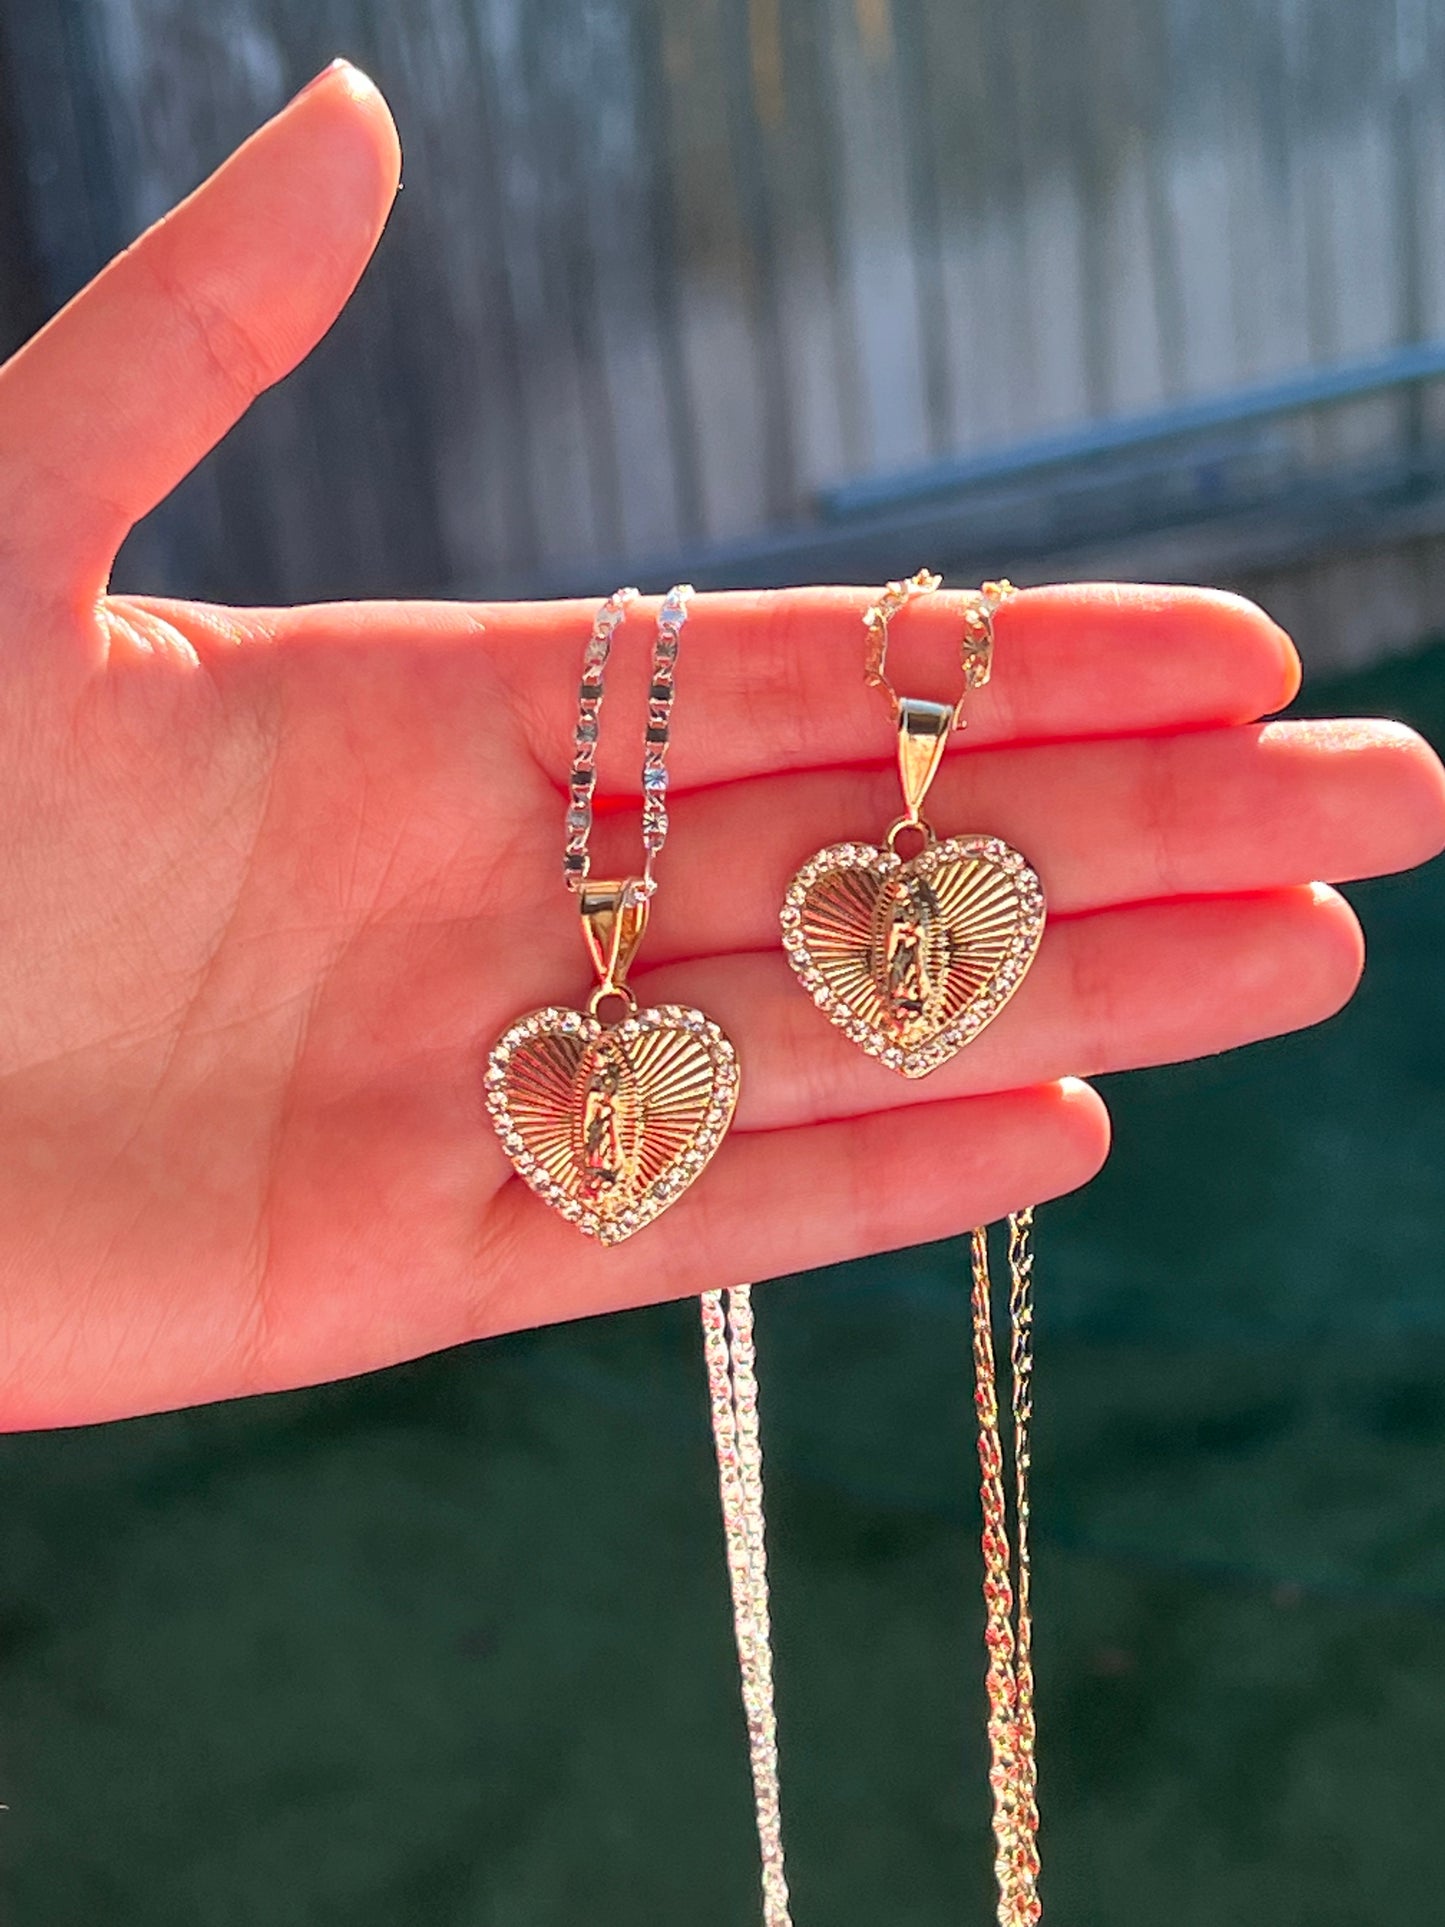 Virgen Mary heart diamond necklace gold chain